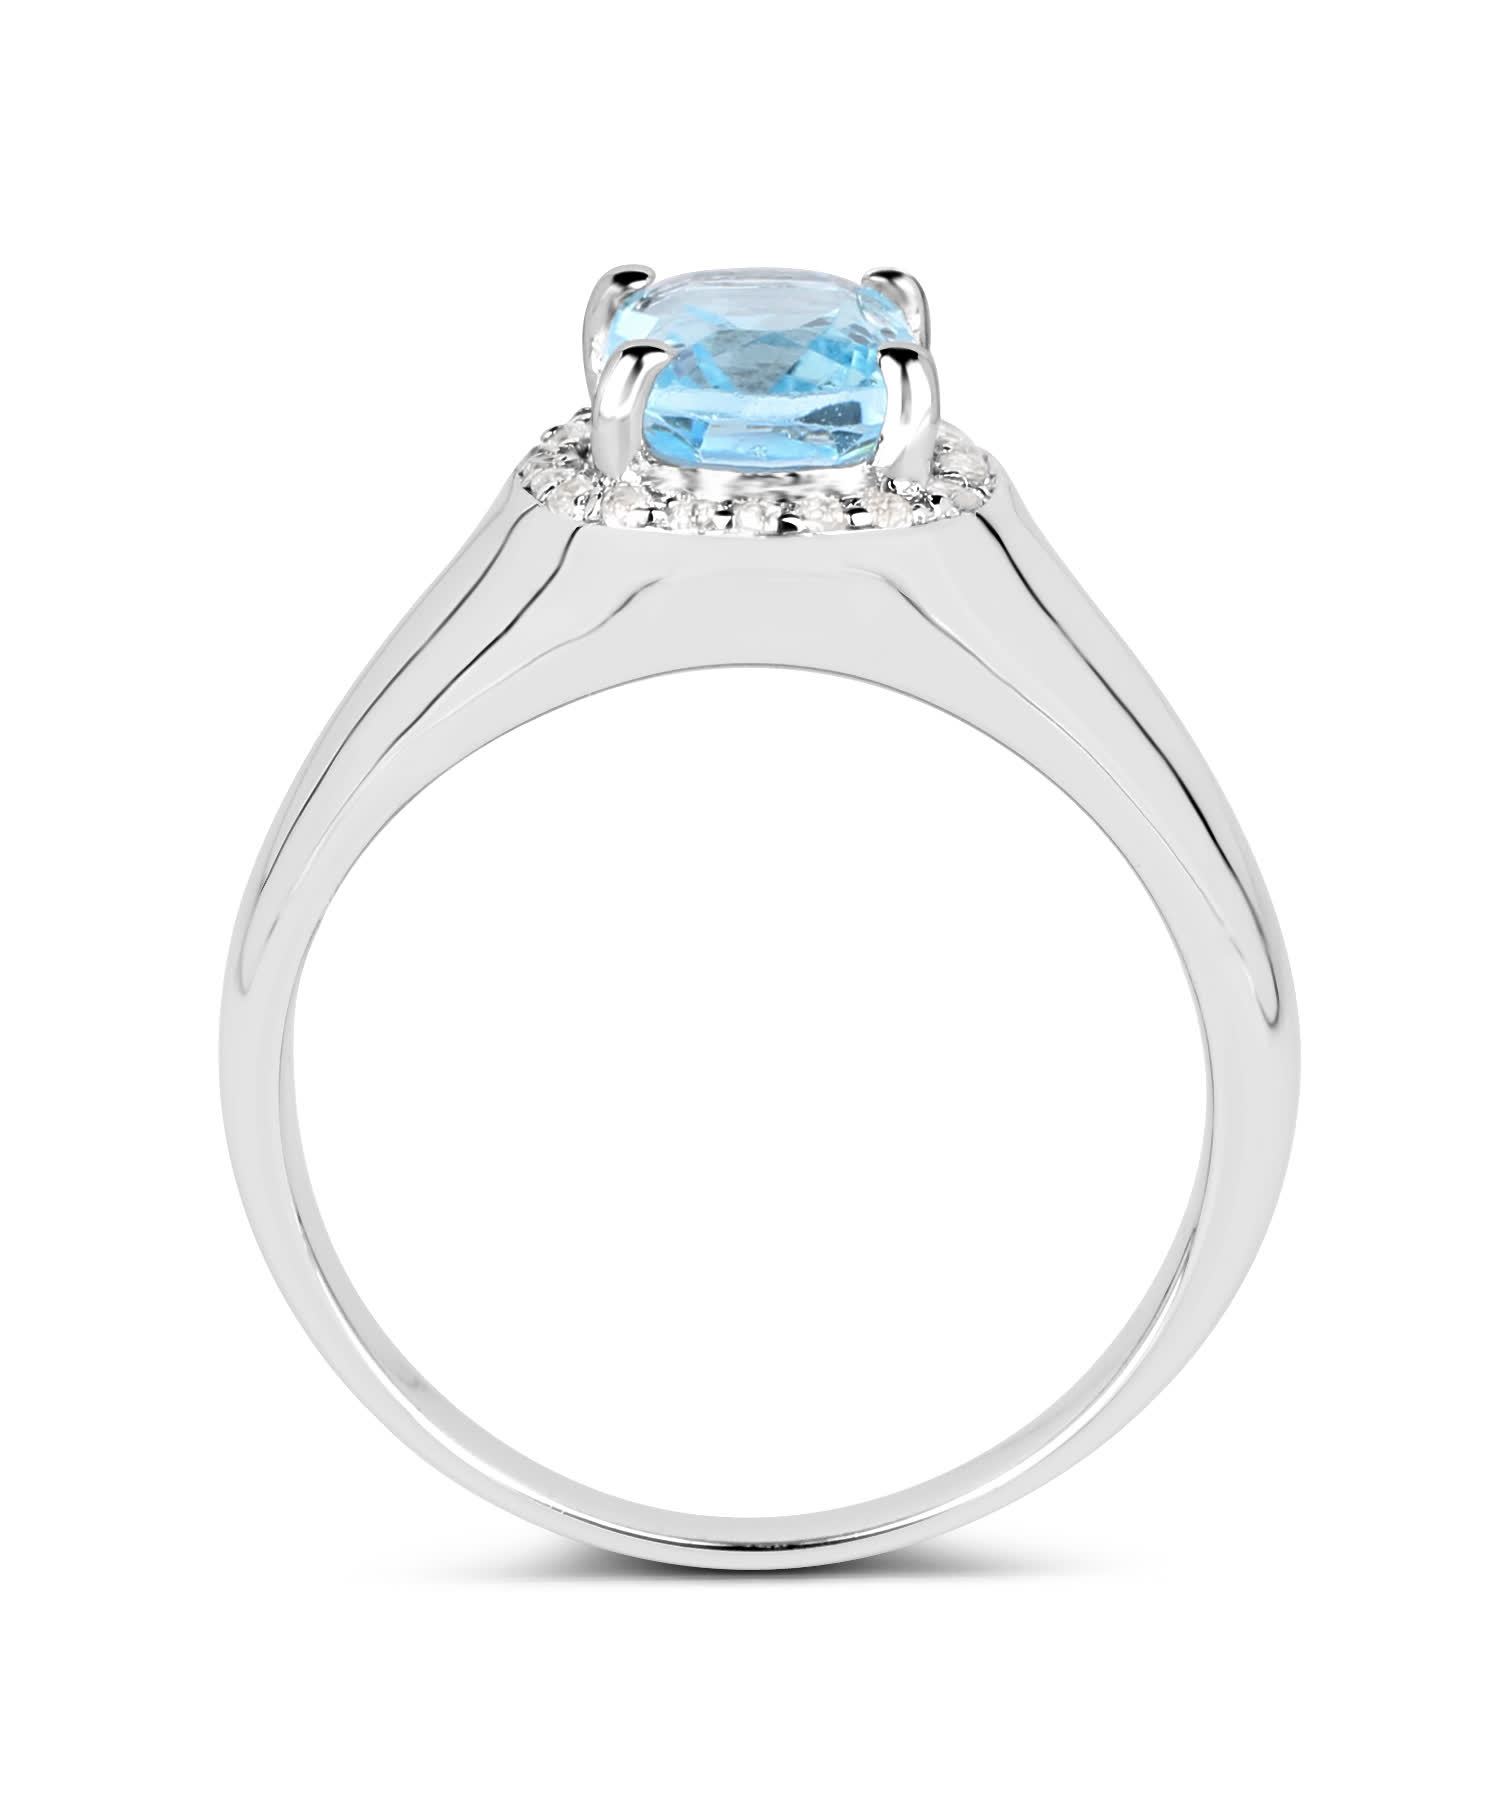 1.62ctw Natural Swiss Blue Topaz Rhodium Plated 925 Sterling Silver Halo Right Hand Ring View 2